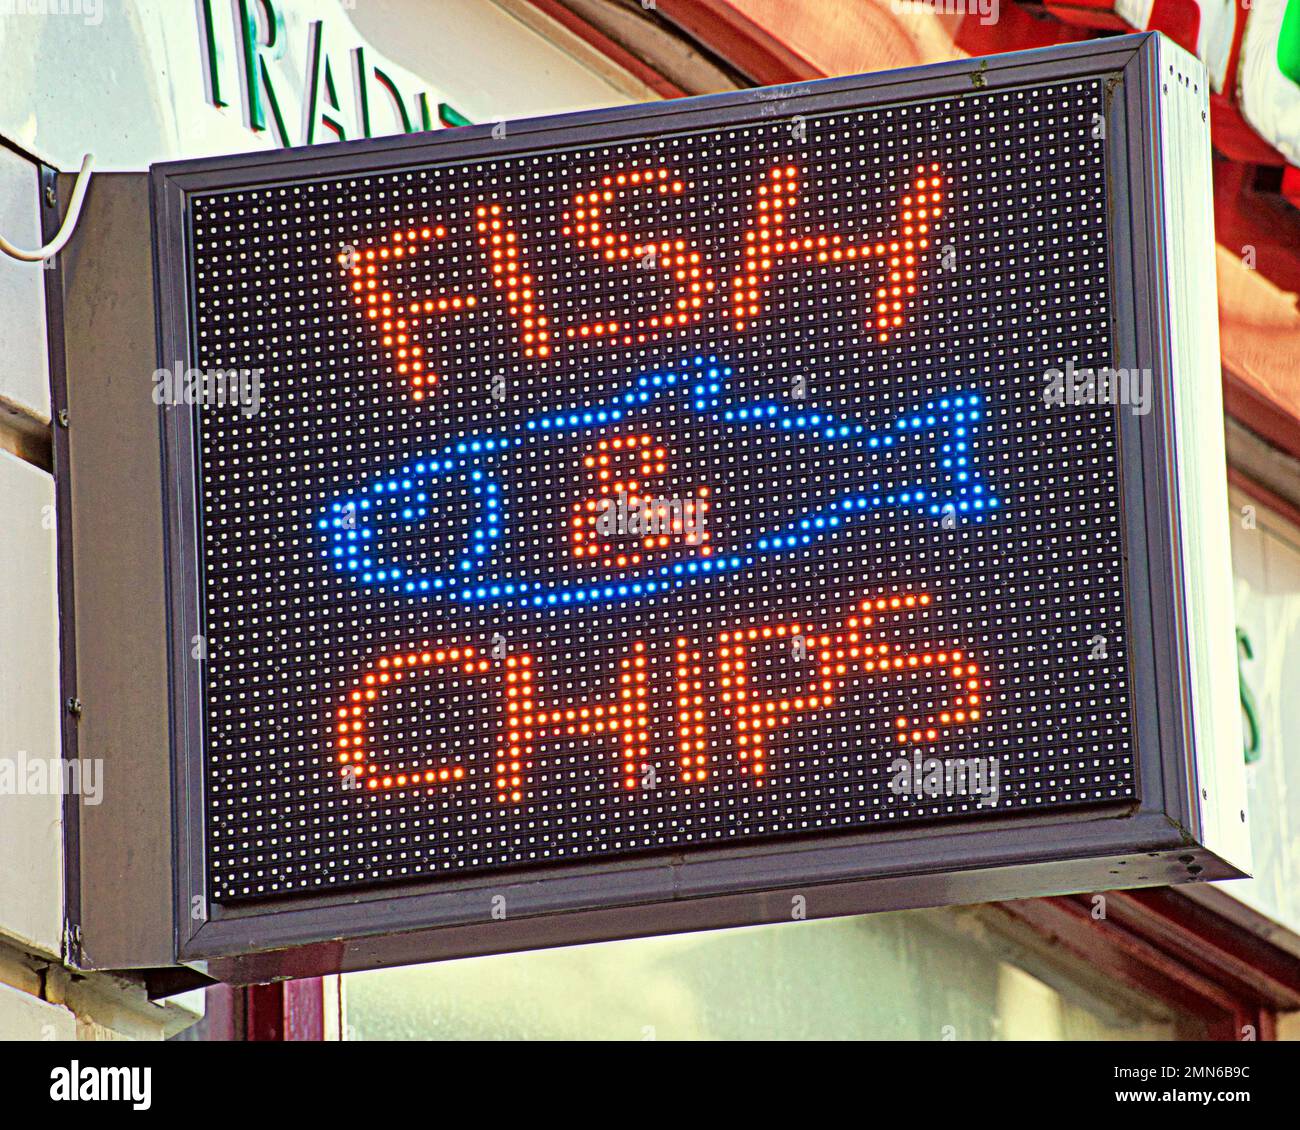 fish and chips digital sign Stock Photo